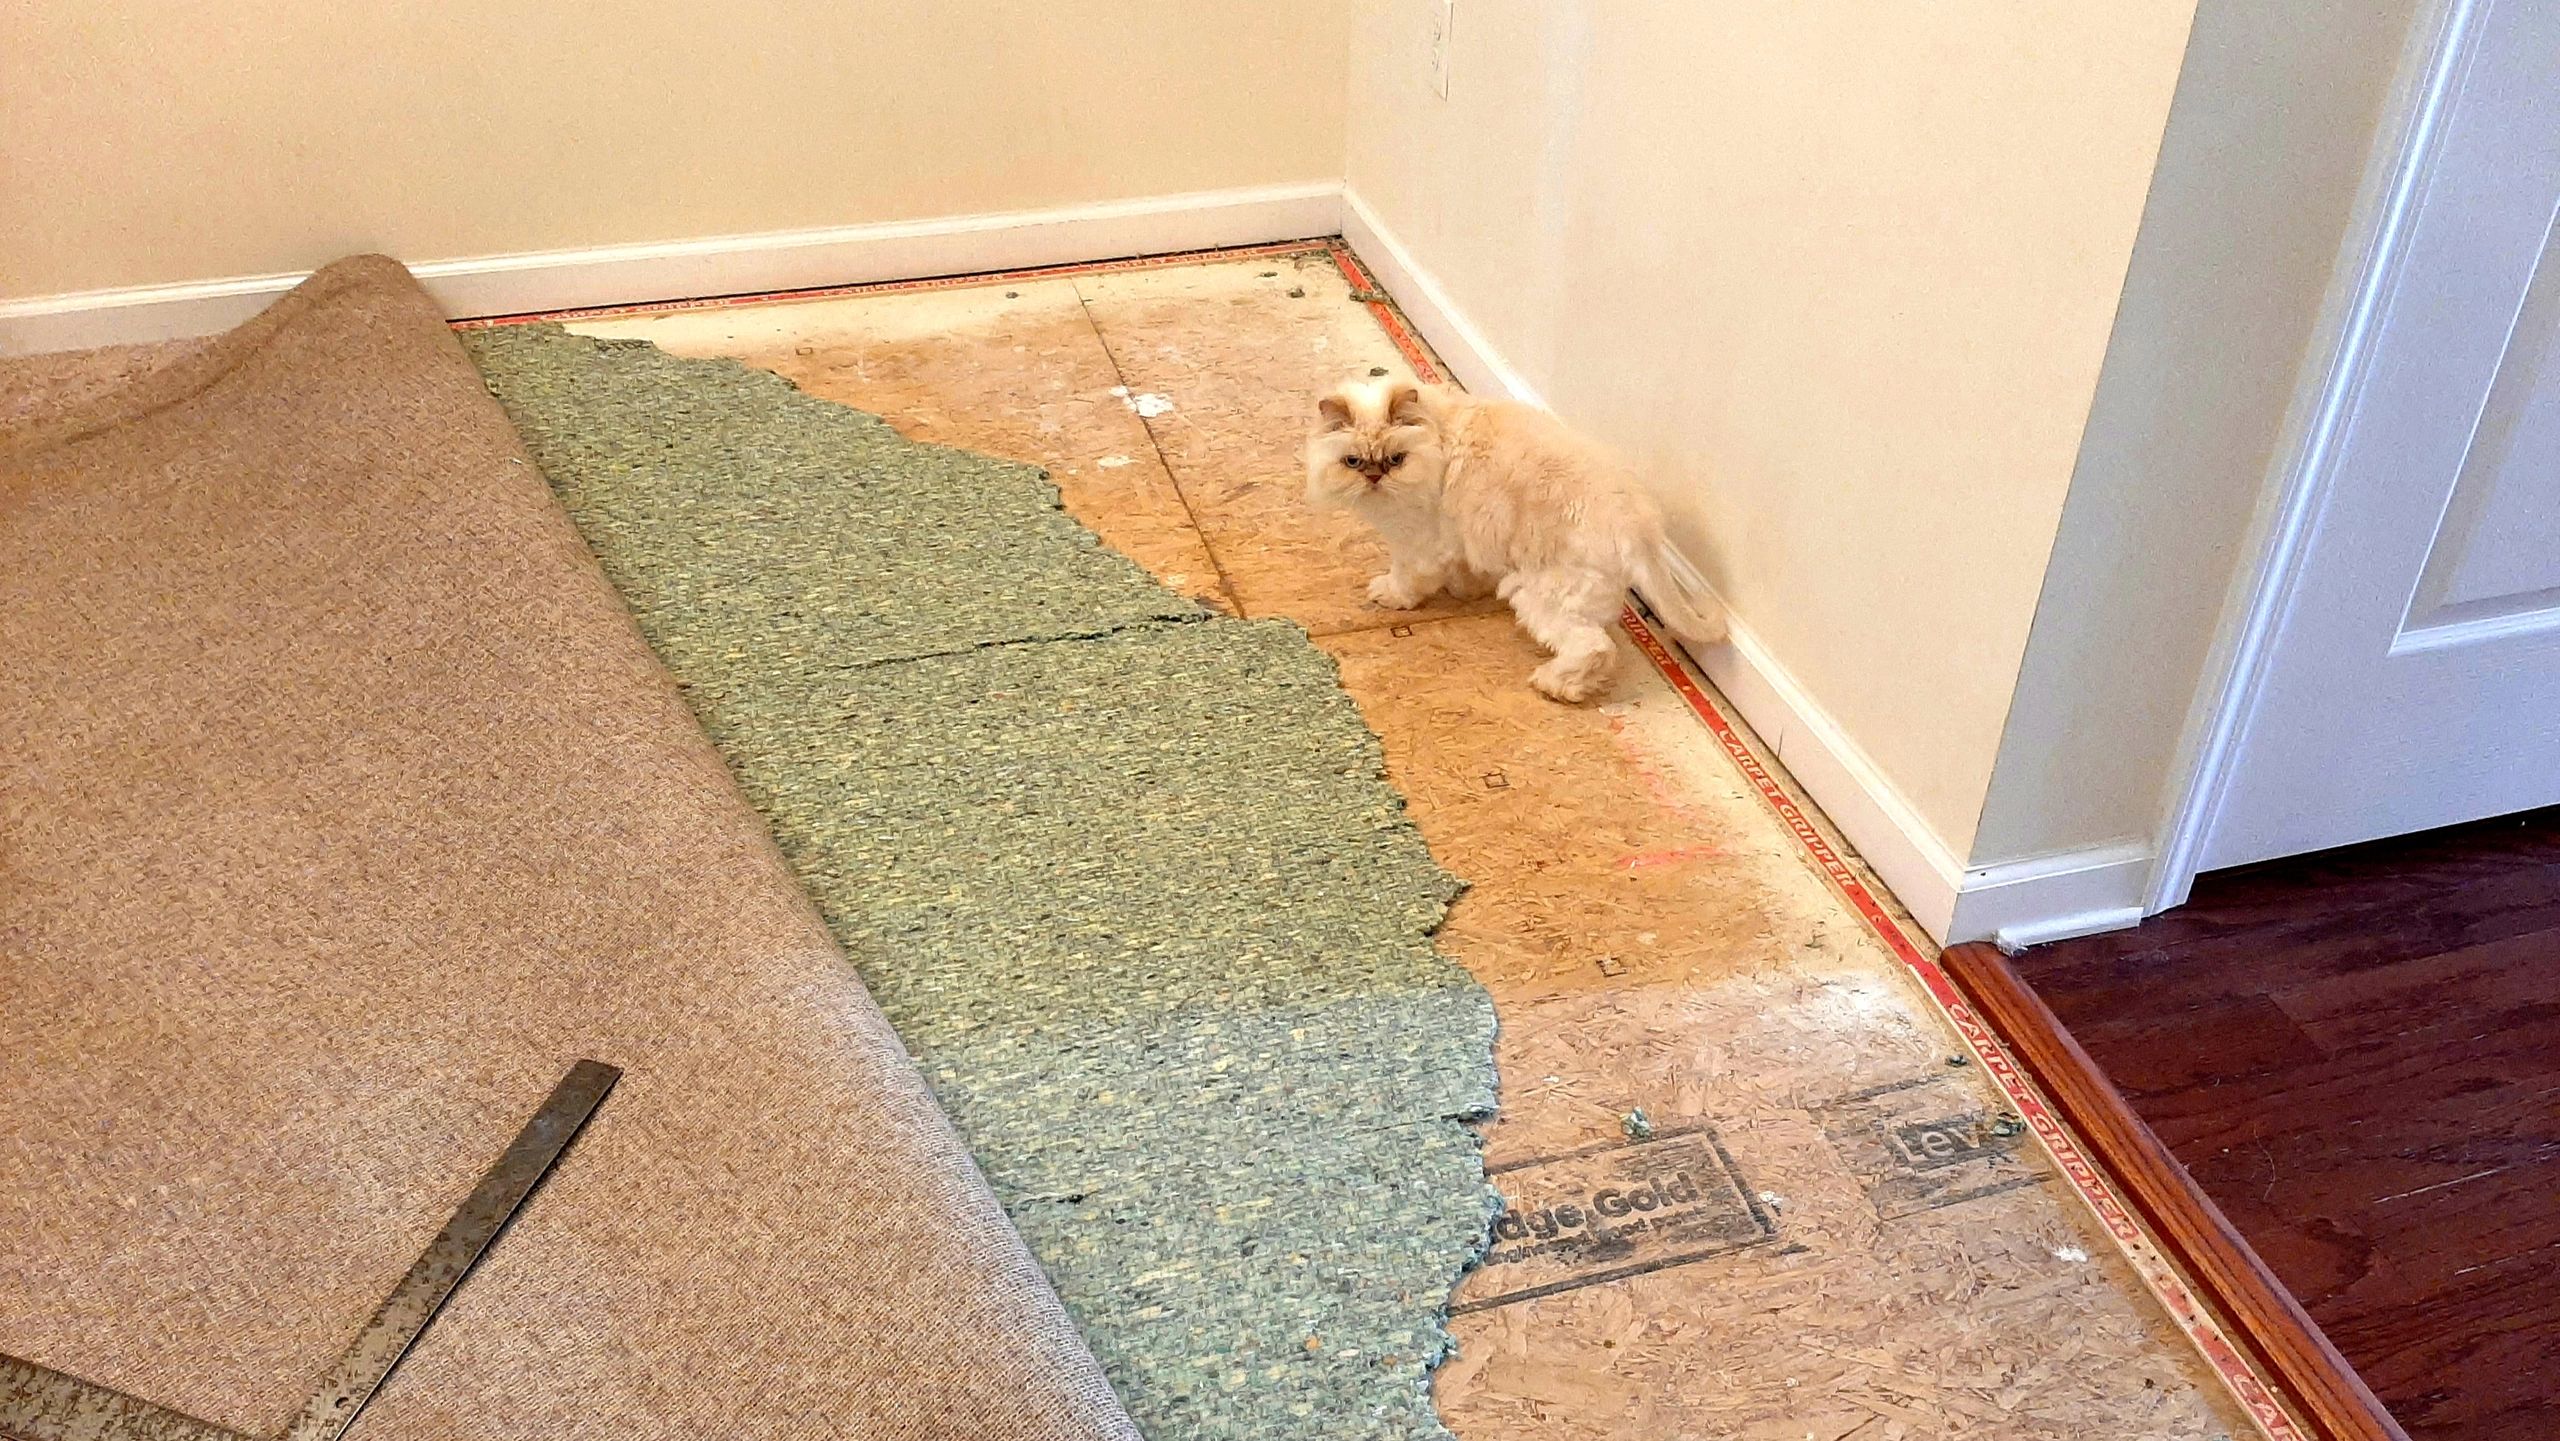 Dog ripped up carpet and pad in house.